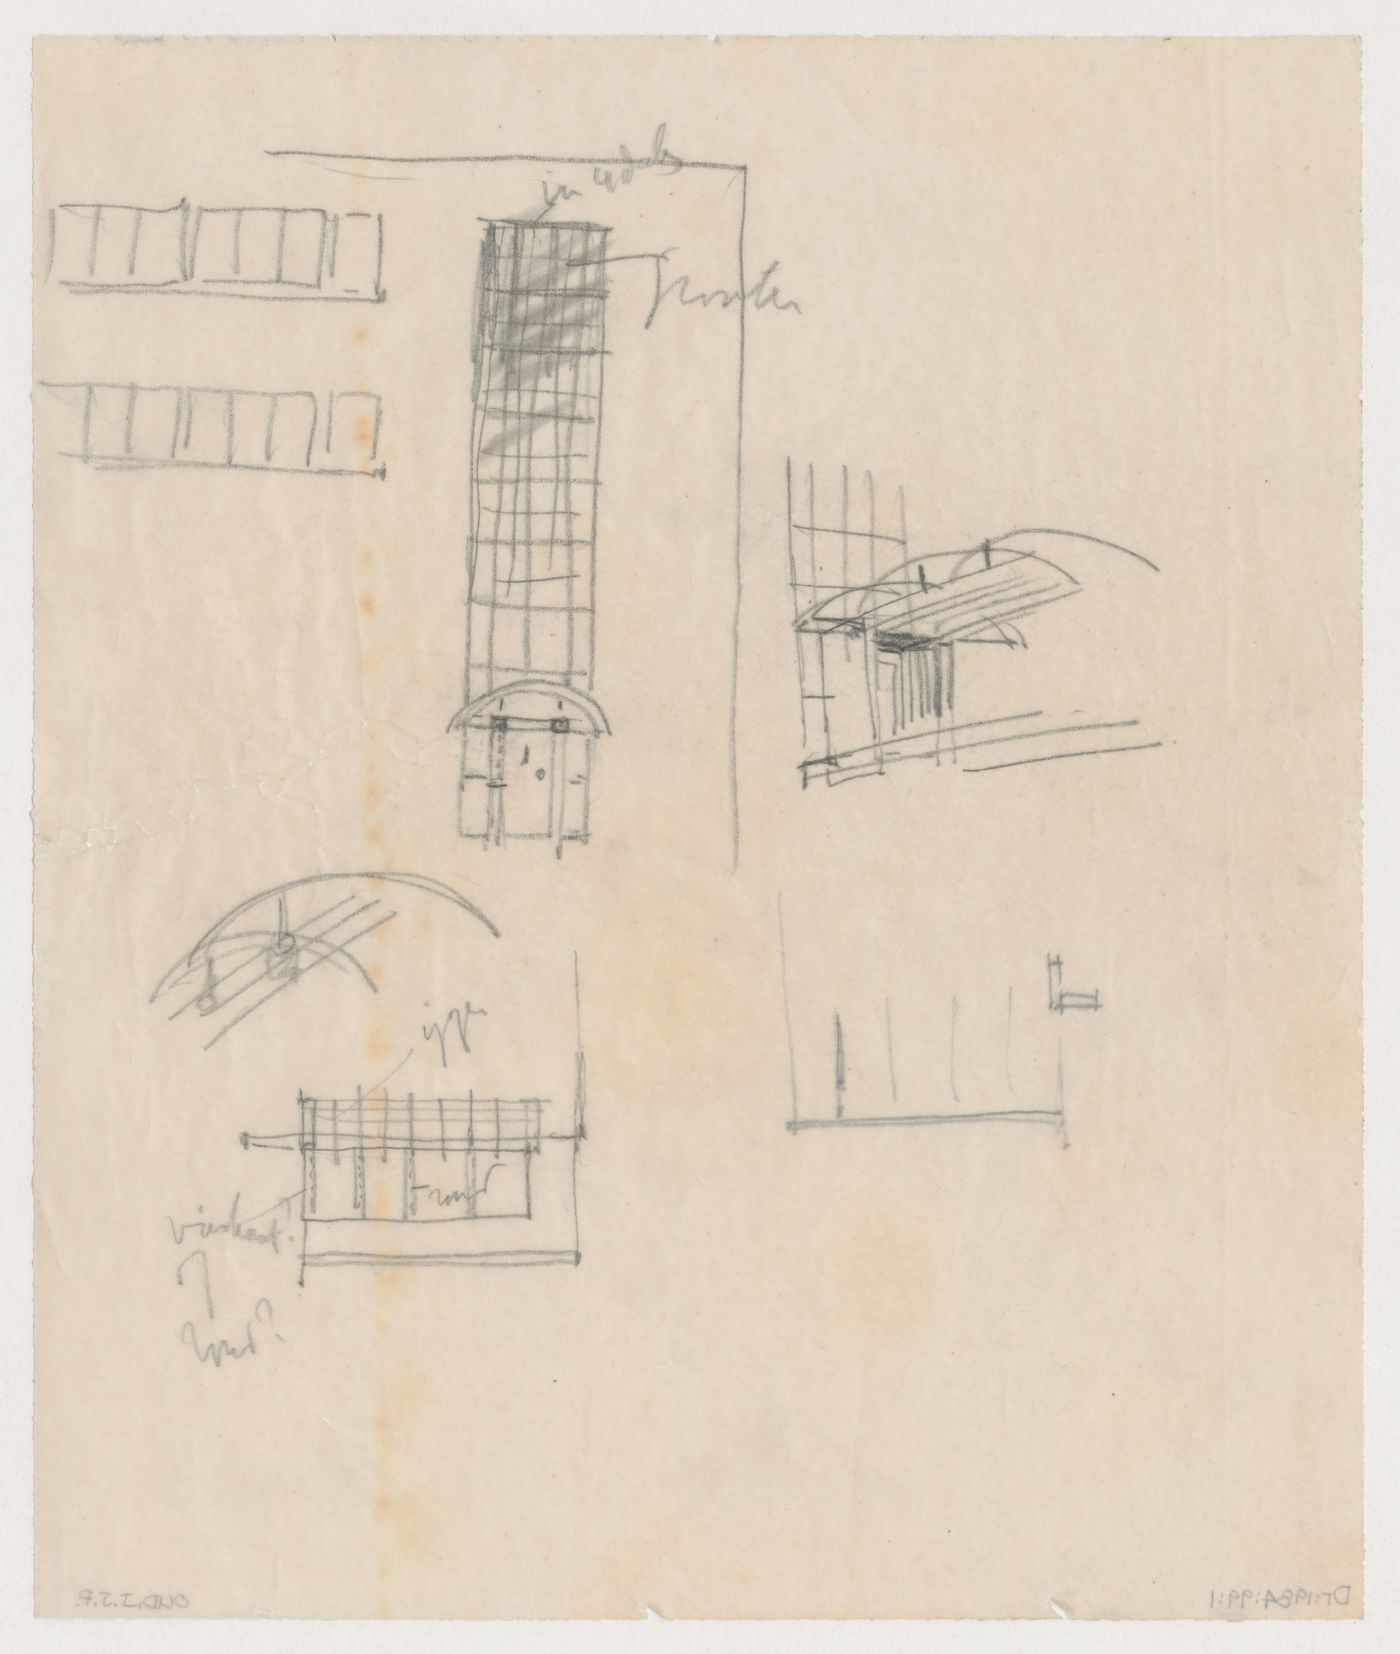 Sketch elevations and worm's-eye sketch perspectives for Three-Family House, Brno, Czechoslovakia (now Czech Republic)